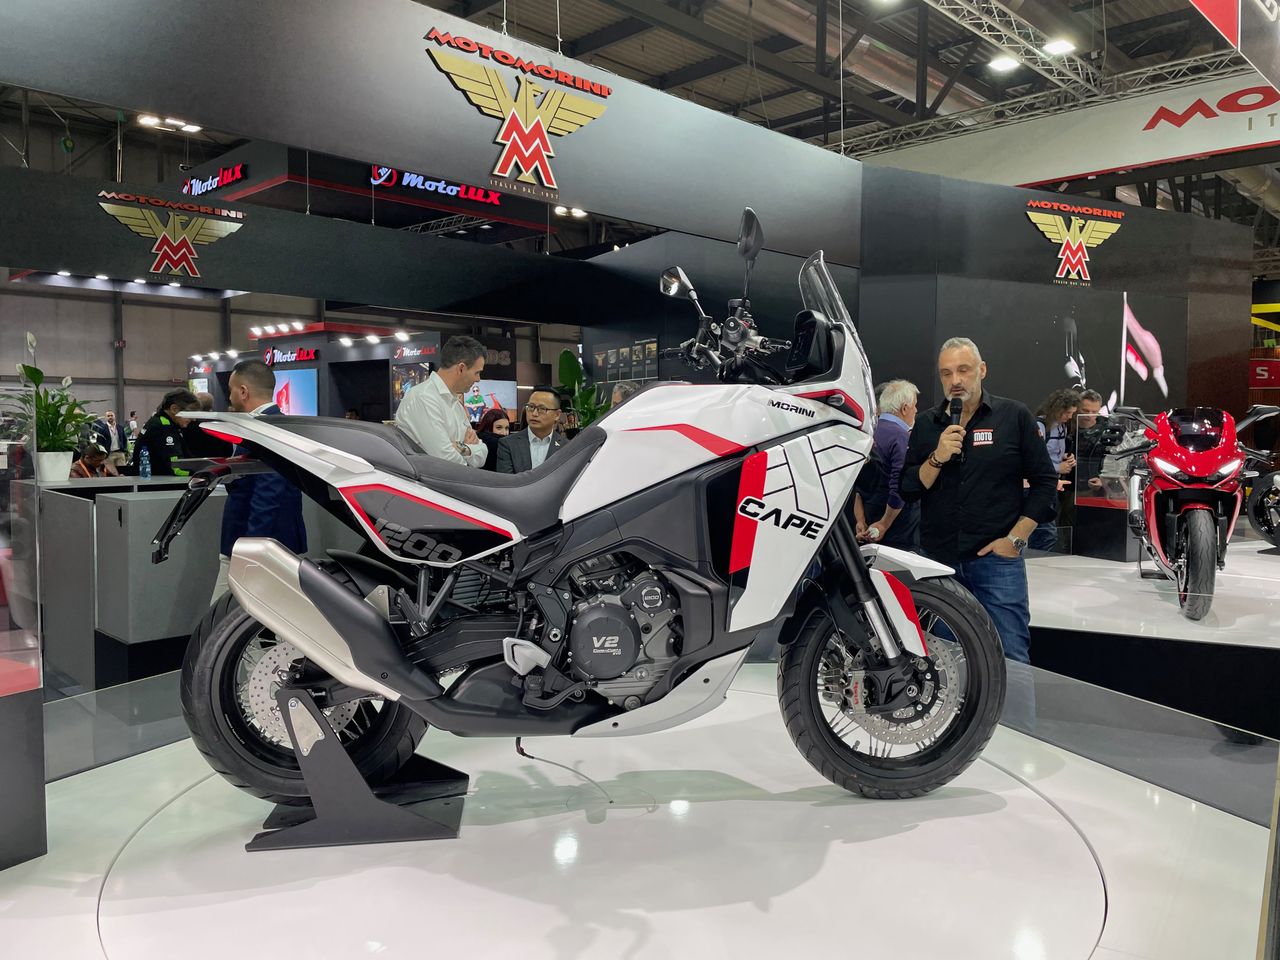 Moto Morini introduces a range of new models: From high-performance tourers to sports bikes